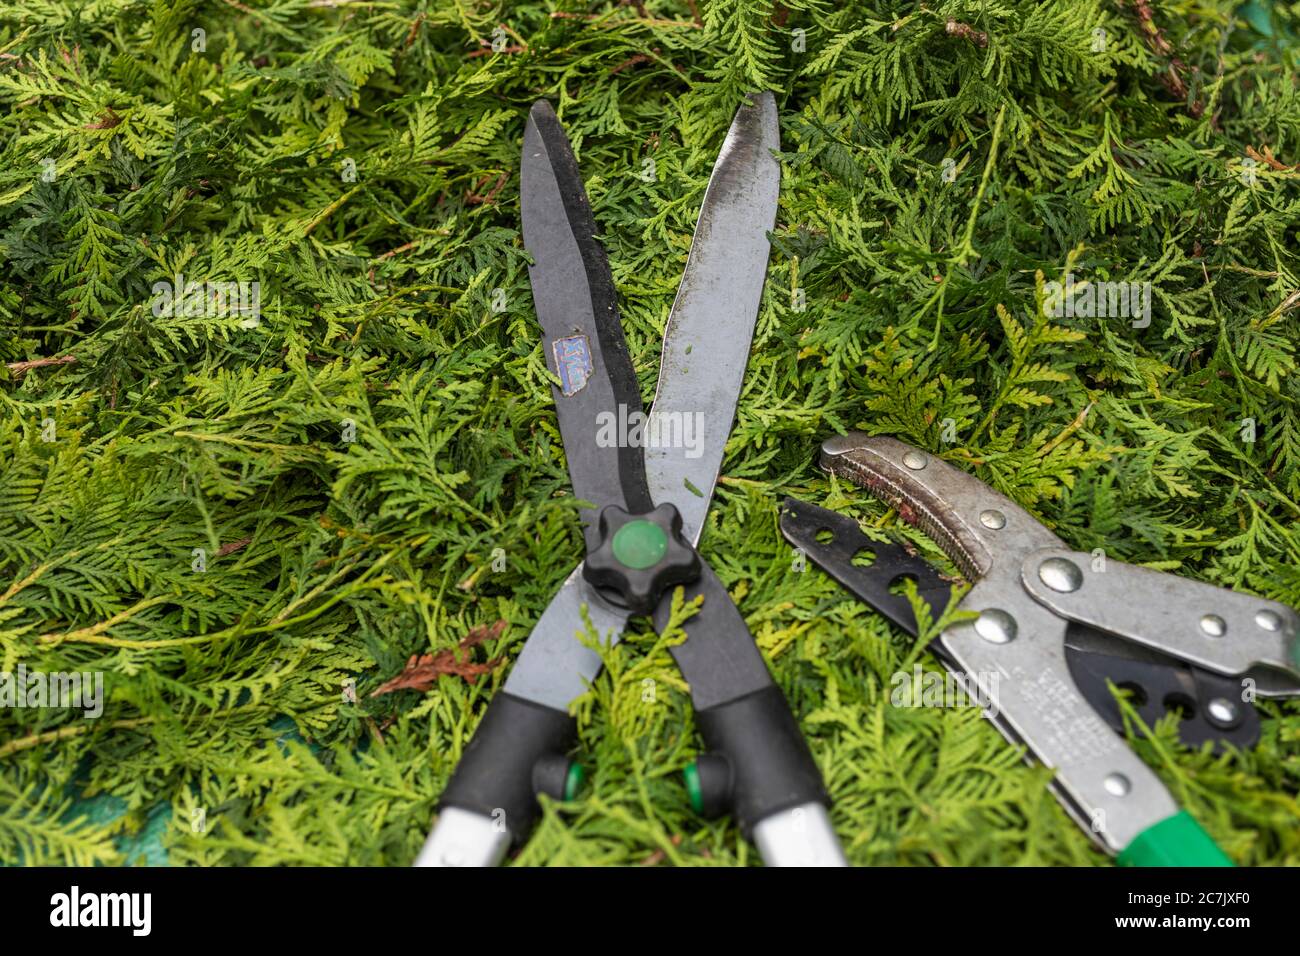 Thuja clippings, anvil pruning shears, hedge trimmers, garden, Wilhelmshaven, Stock Photo